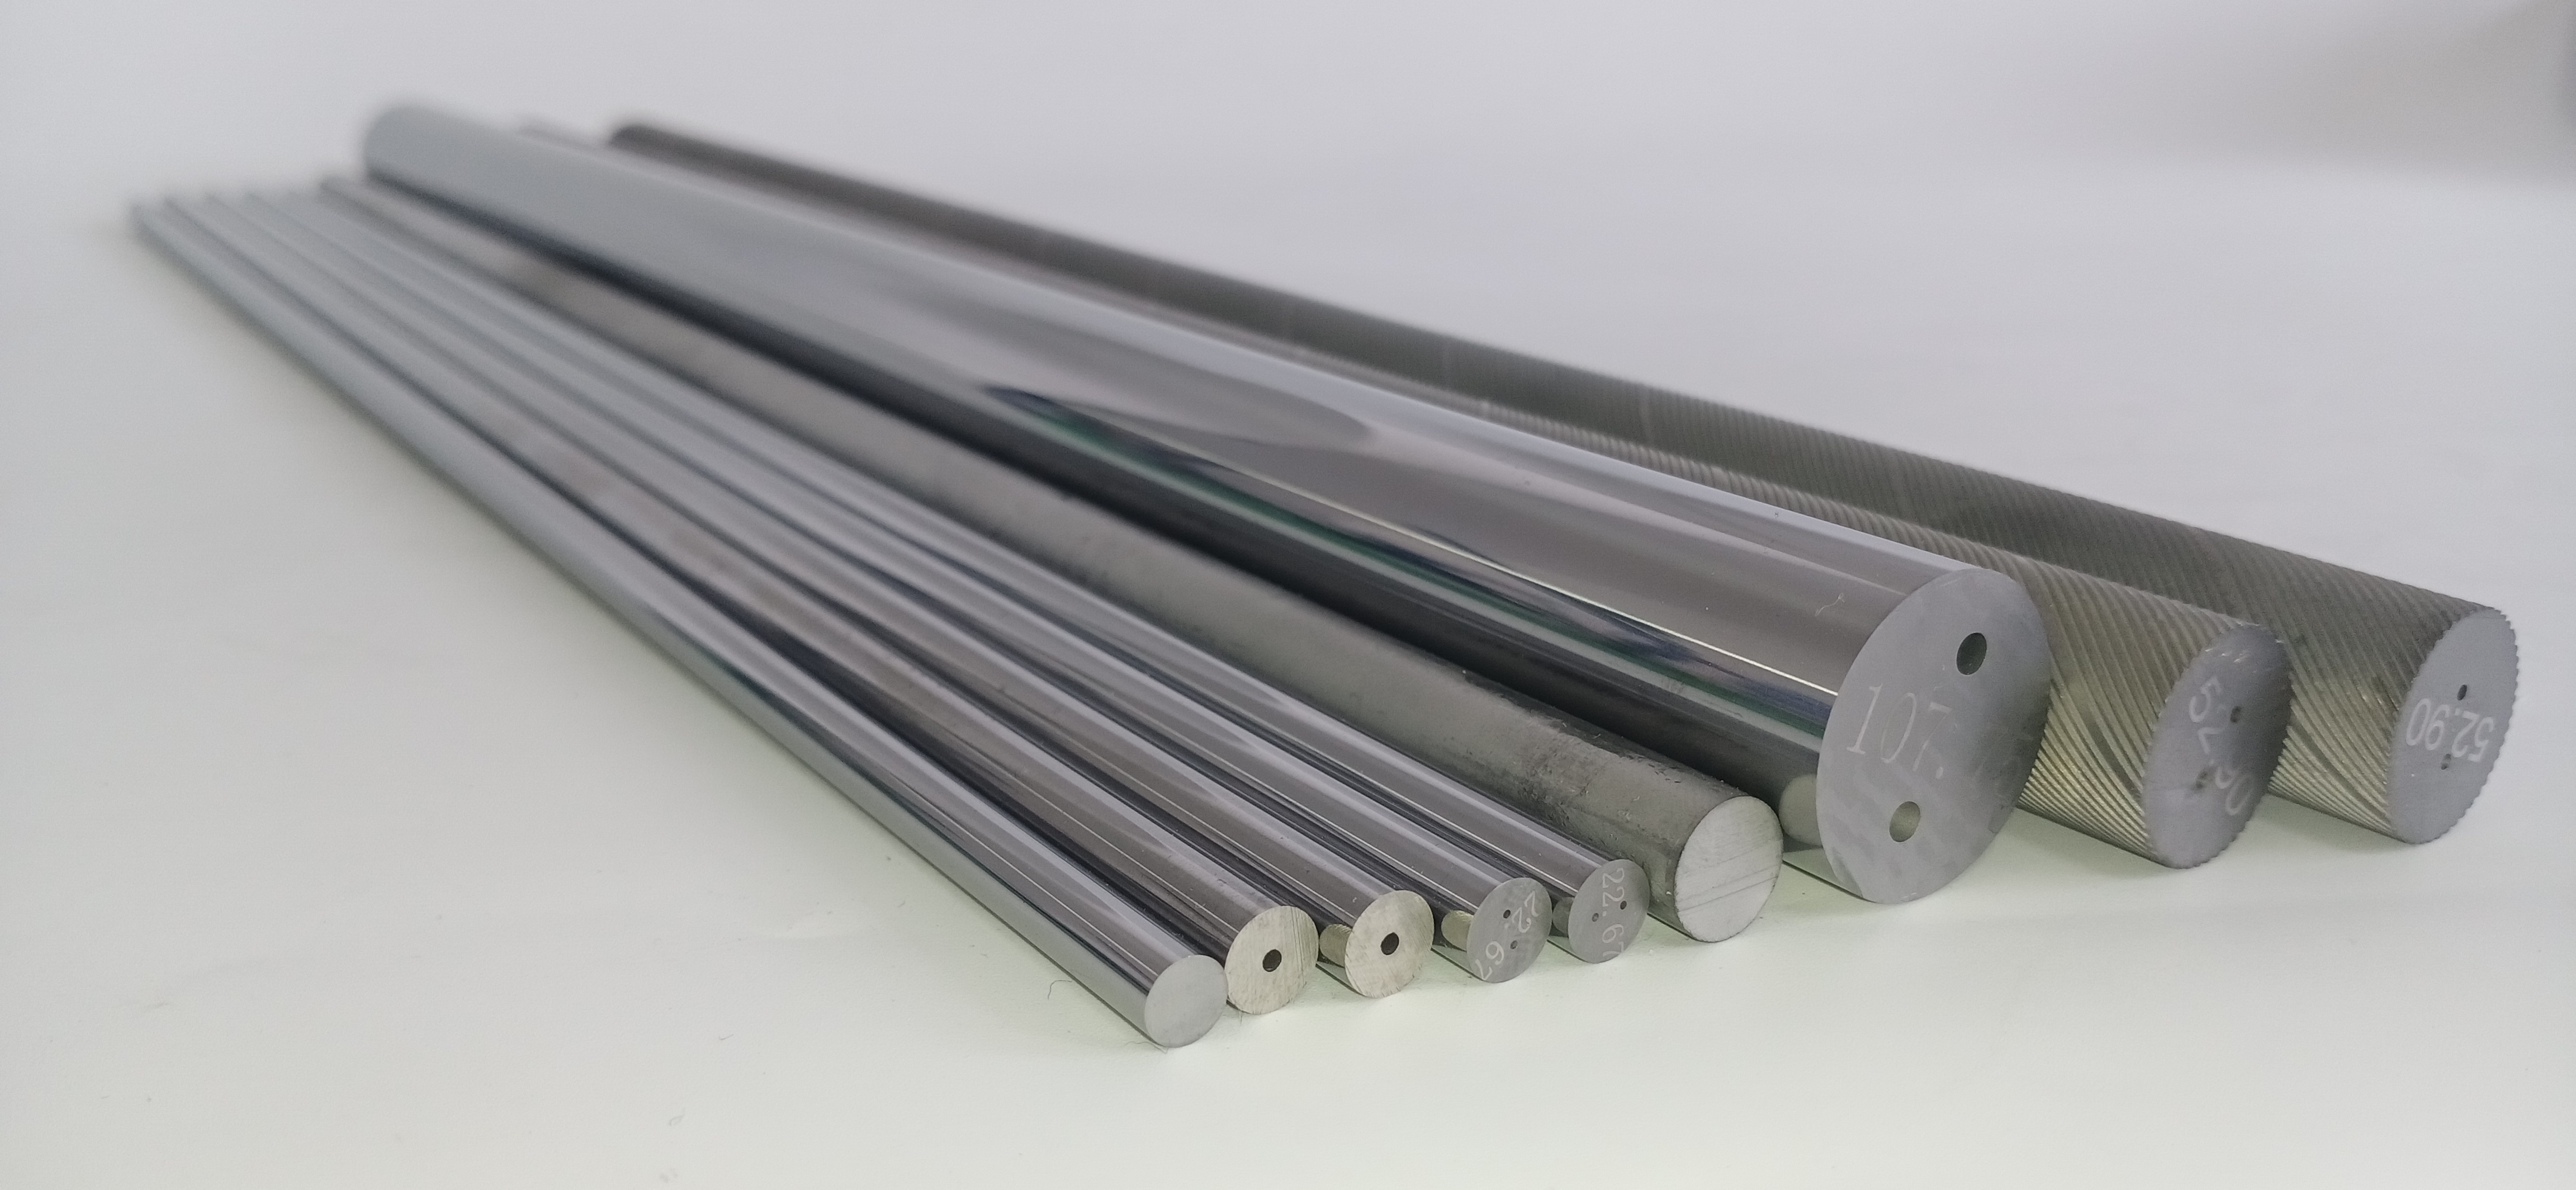 What are the main considerations for storing and handling carbide rods?